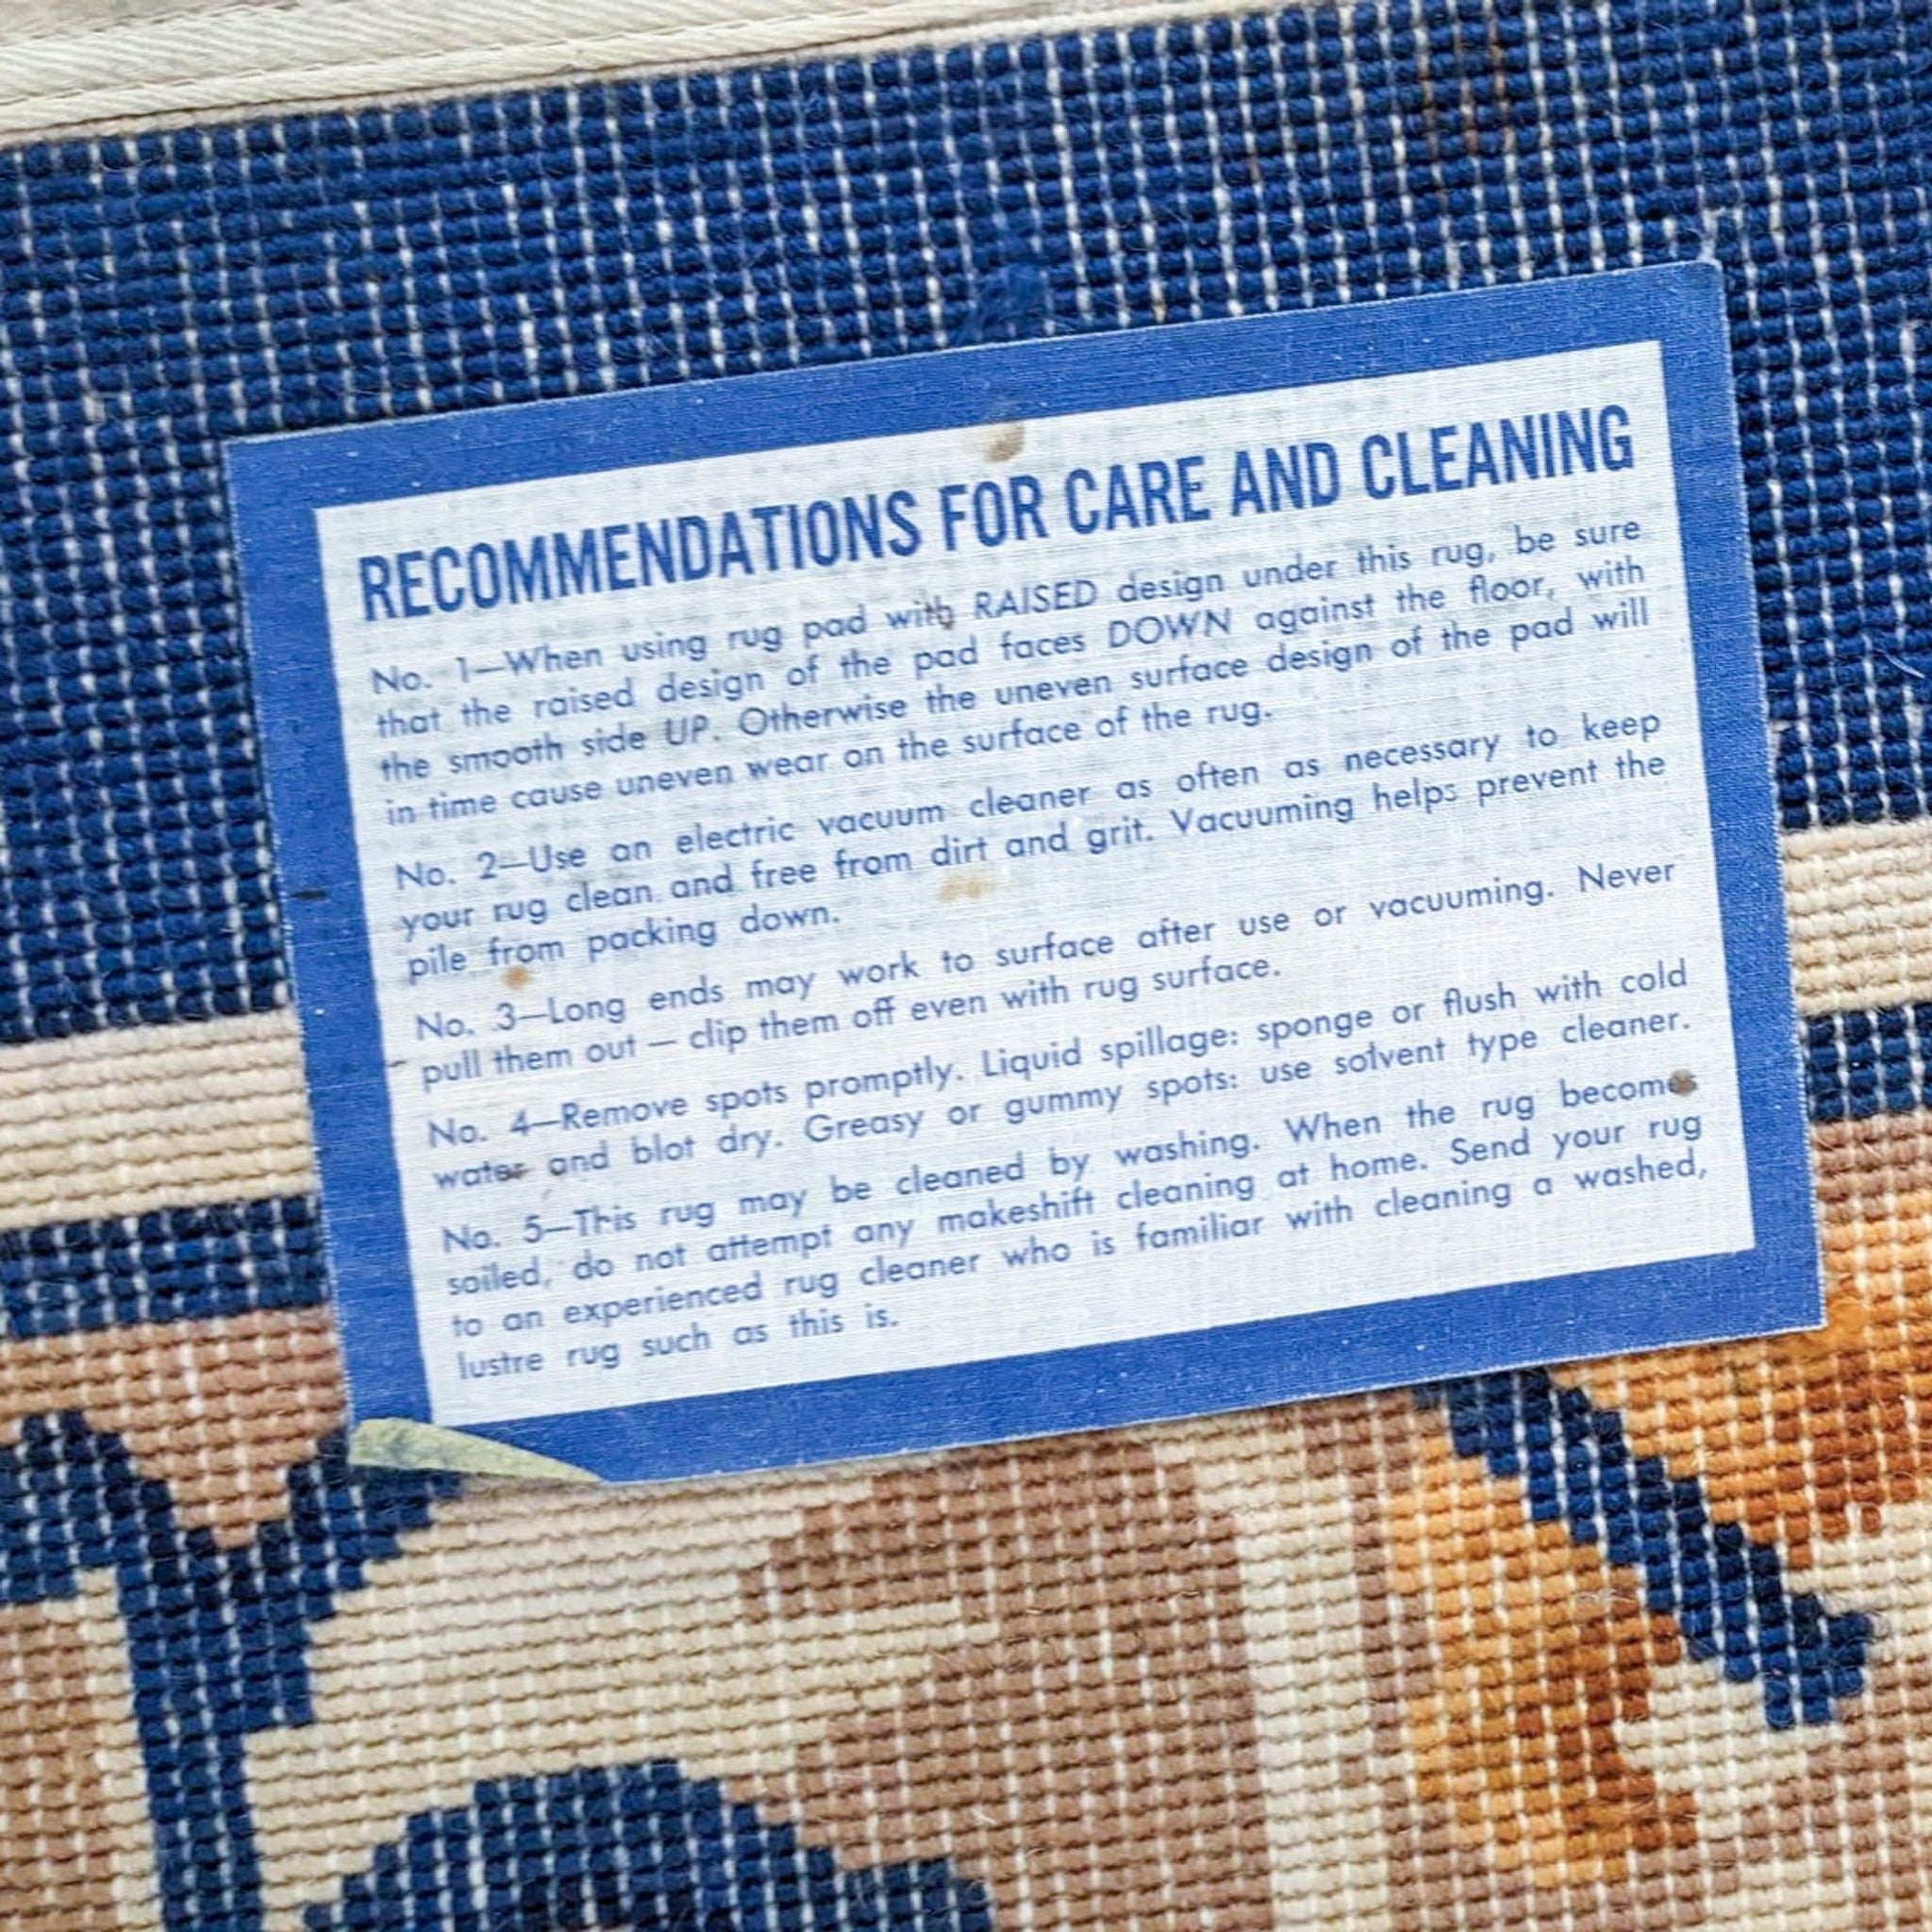 Alt text: Care instructions label on a Karastan wool area rug with details on cleaning and maintenance, set against a blue-and-cream patterned background.